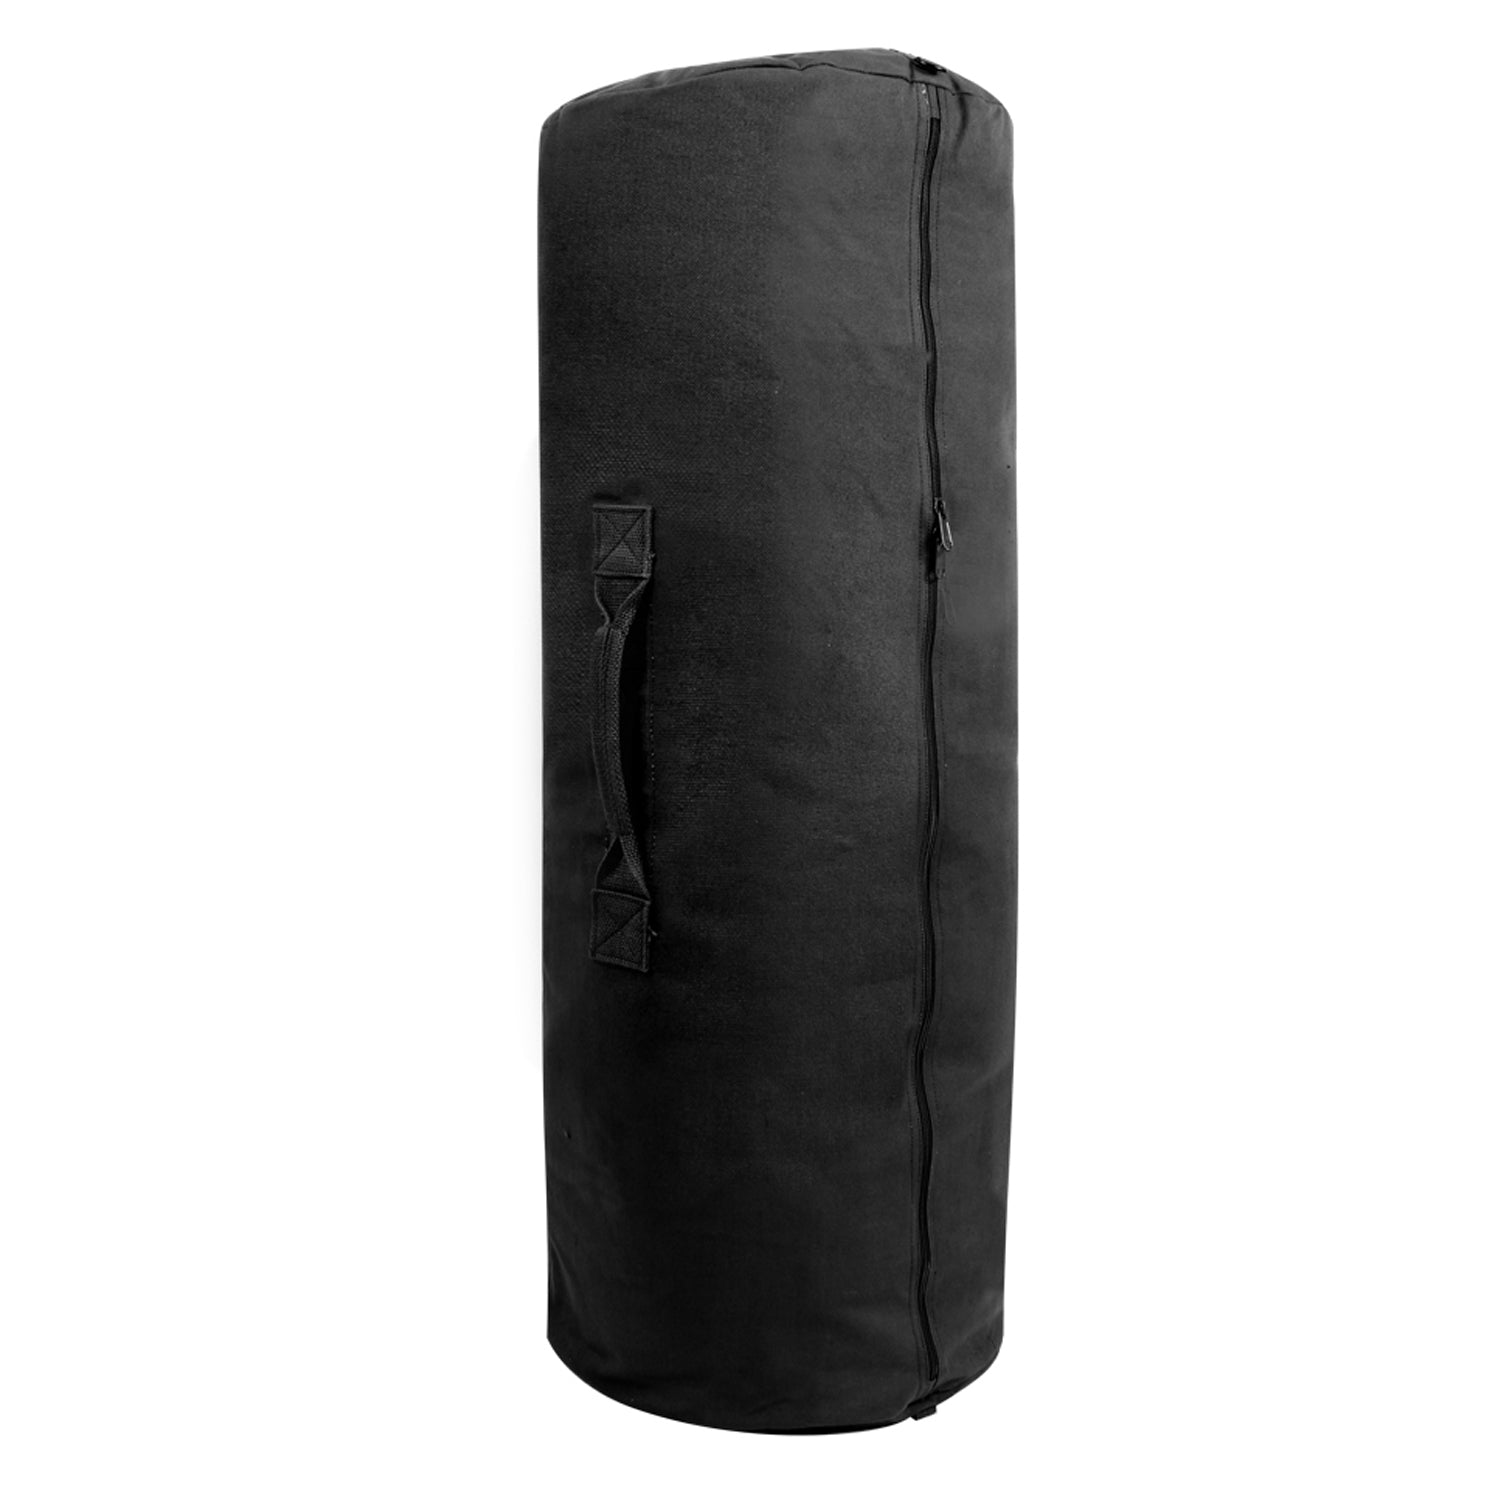 Canvas Duffle Bag with Side Zipper - Tactical Choice Plus